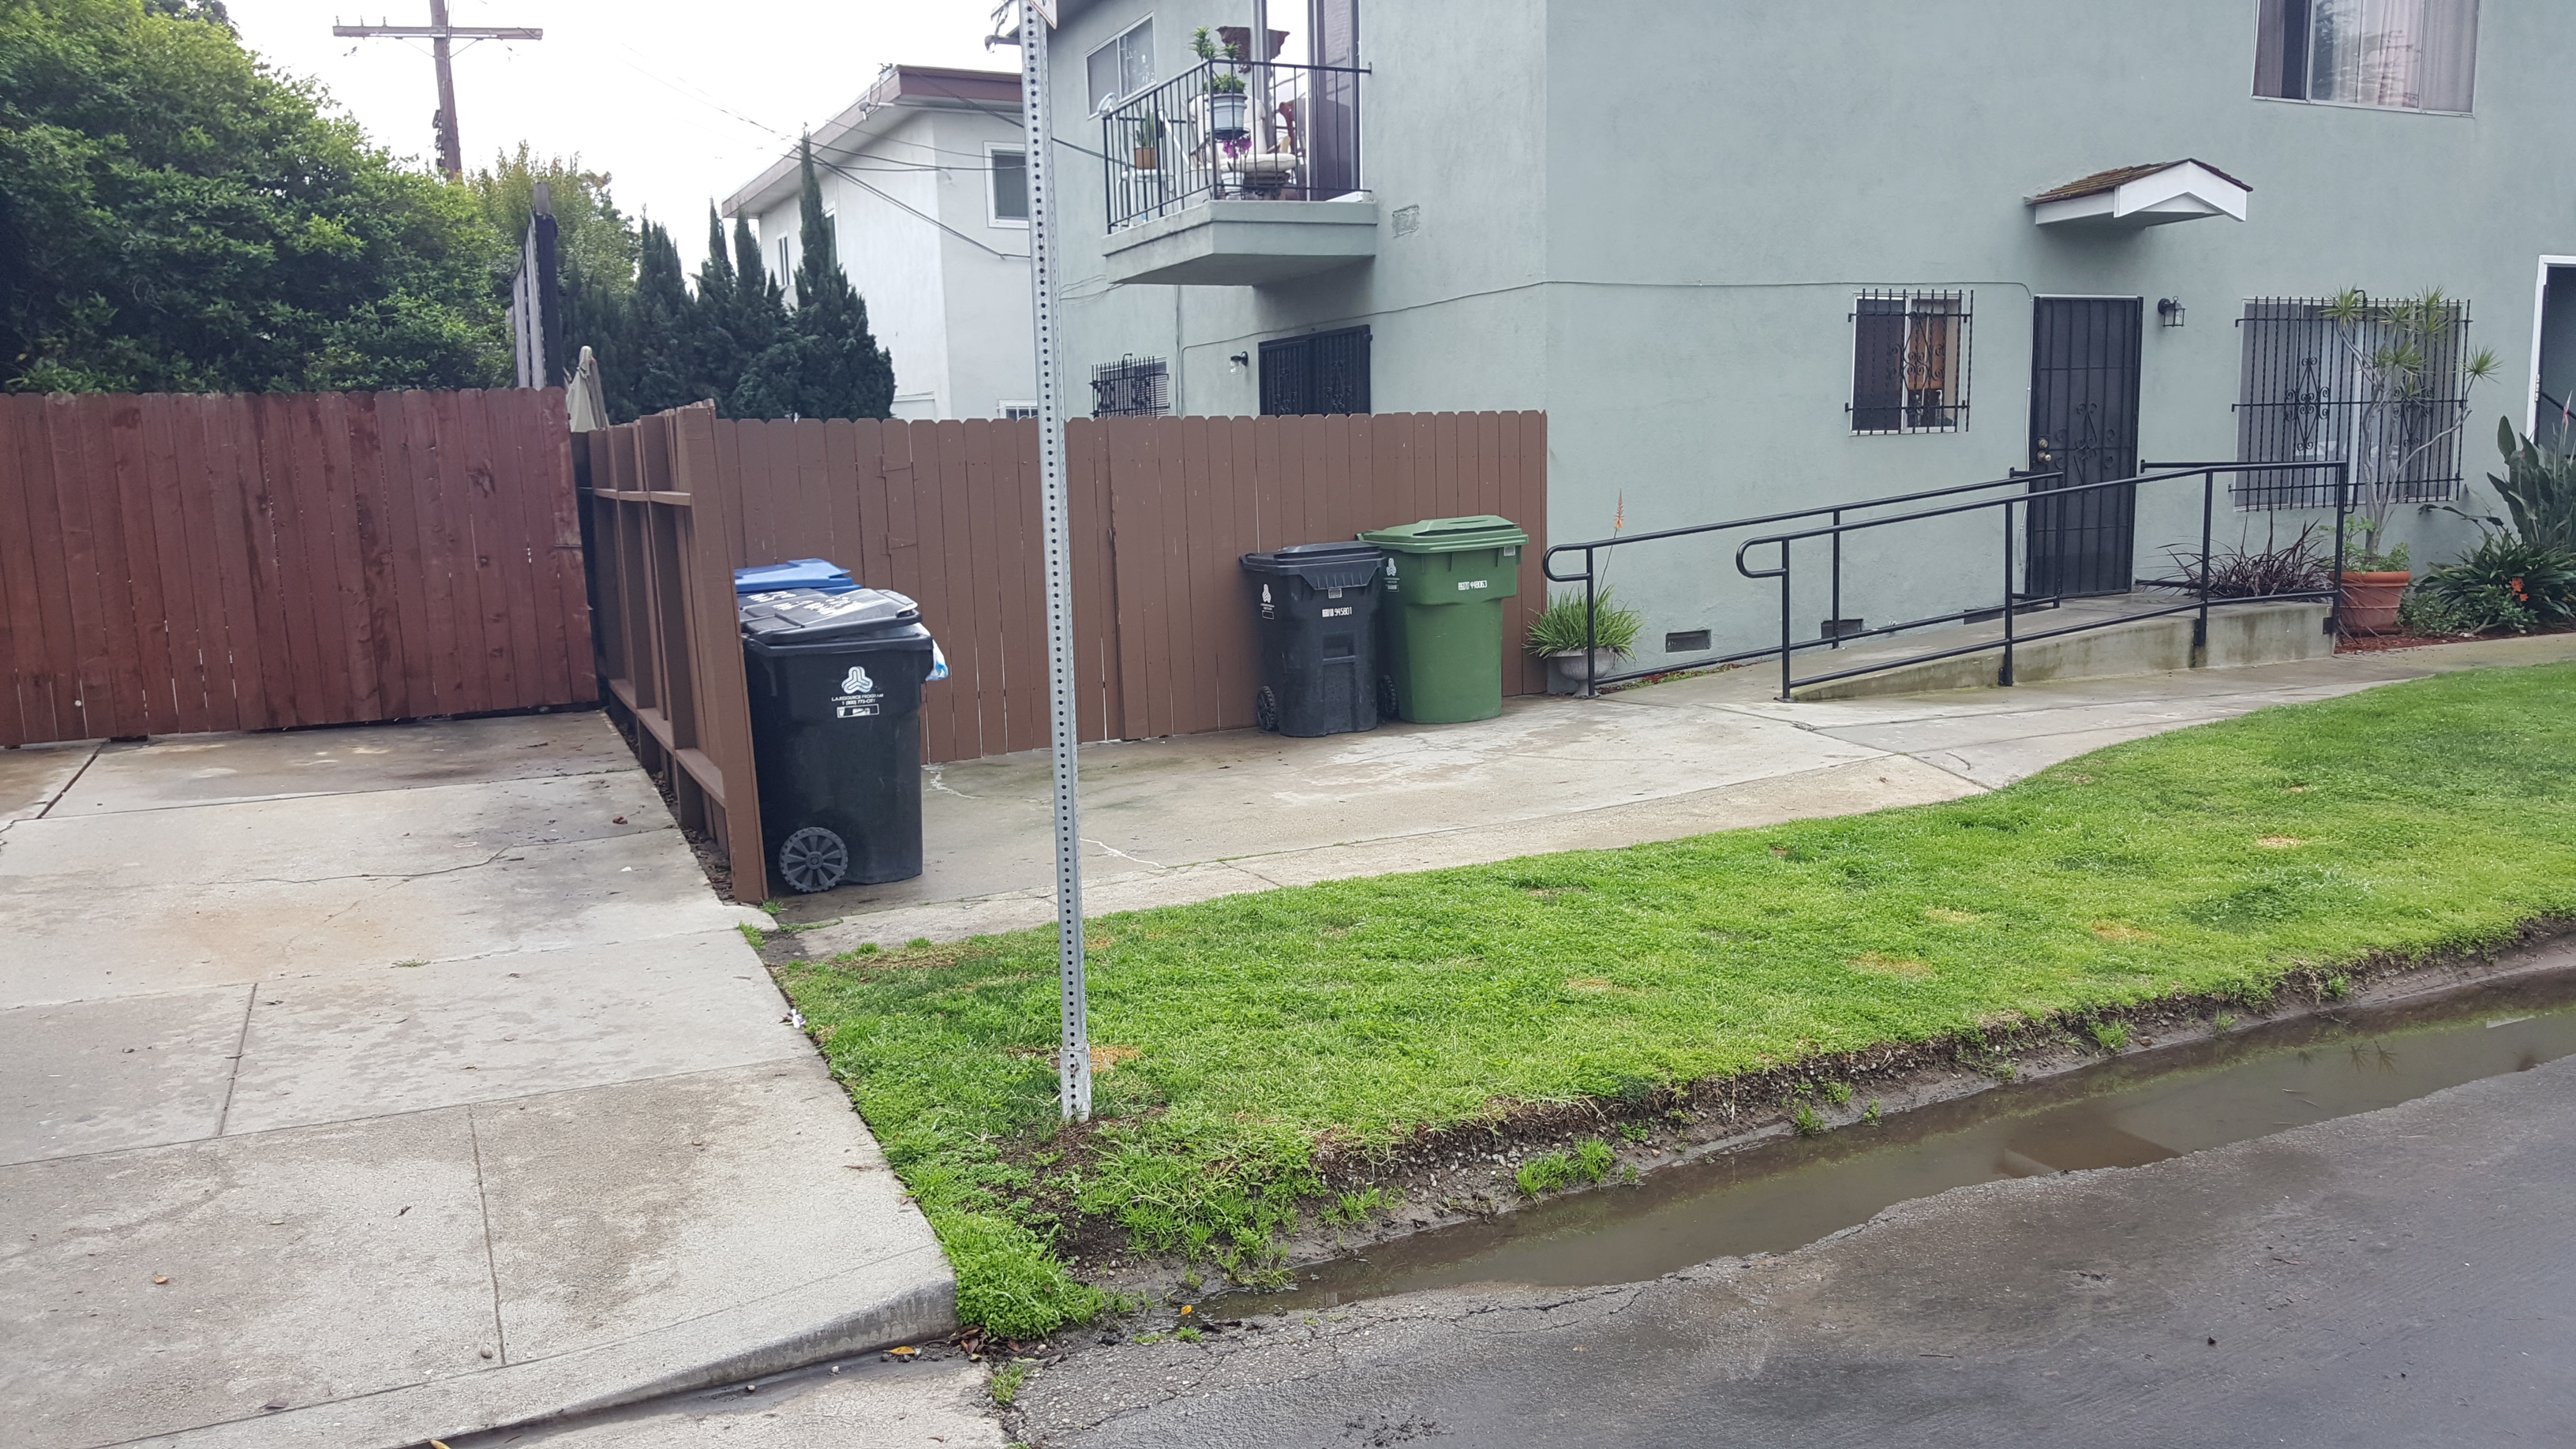 Image of 2 floor building with grass area in front yard. Lower level has a ramp leading to the front door, brown fenced in patio, windows with bars. Upper level has a balcony